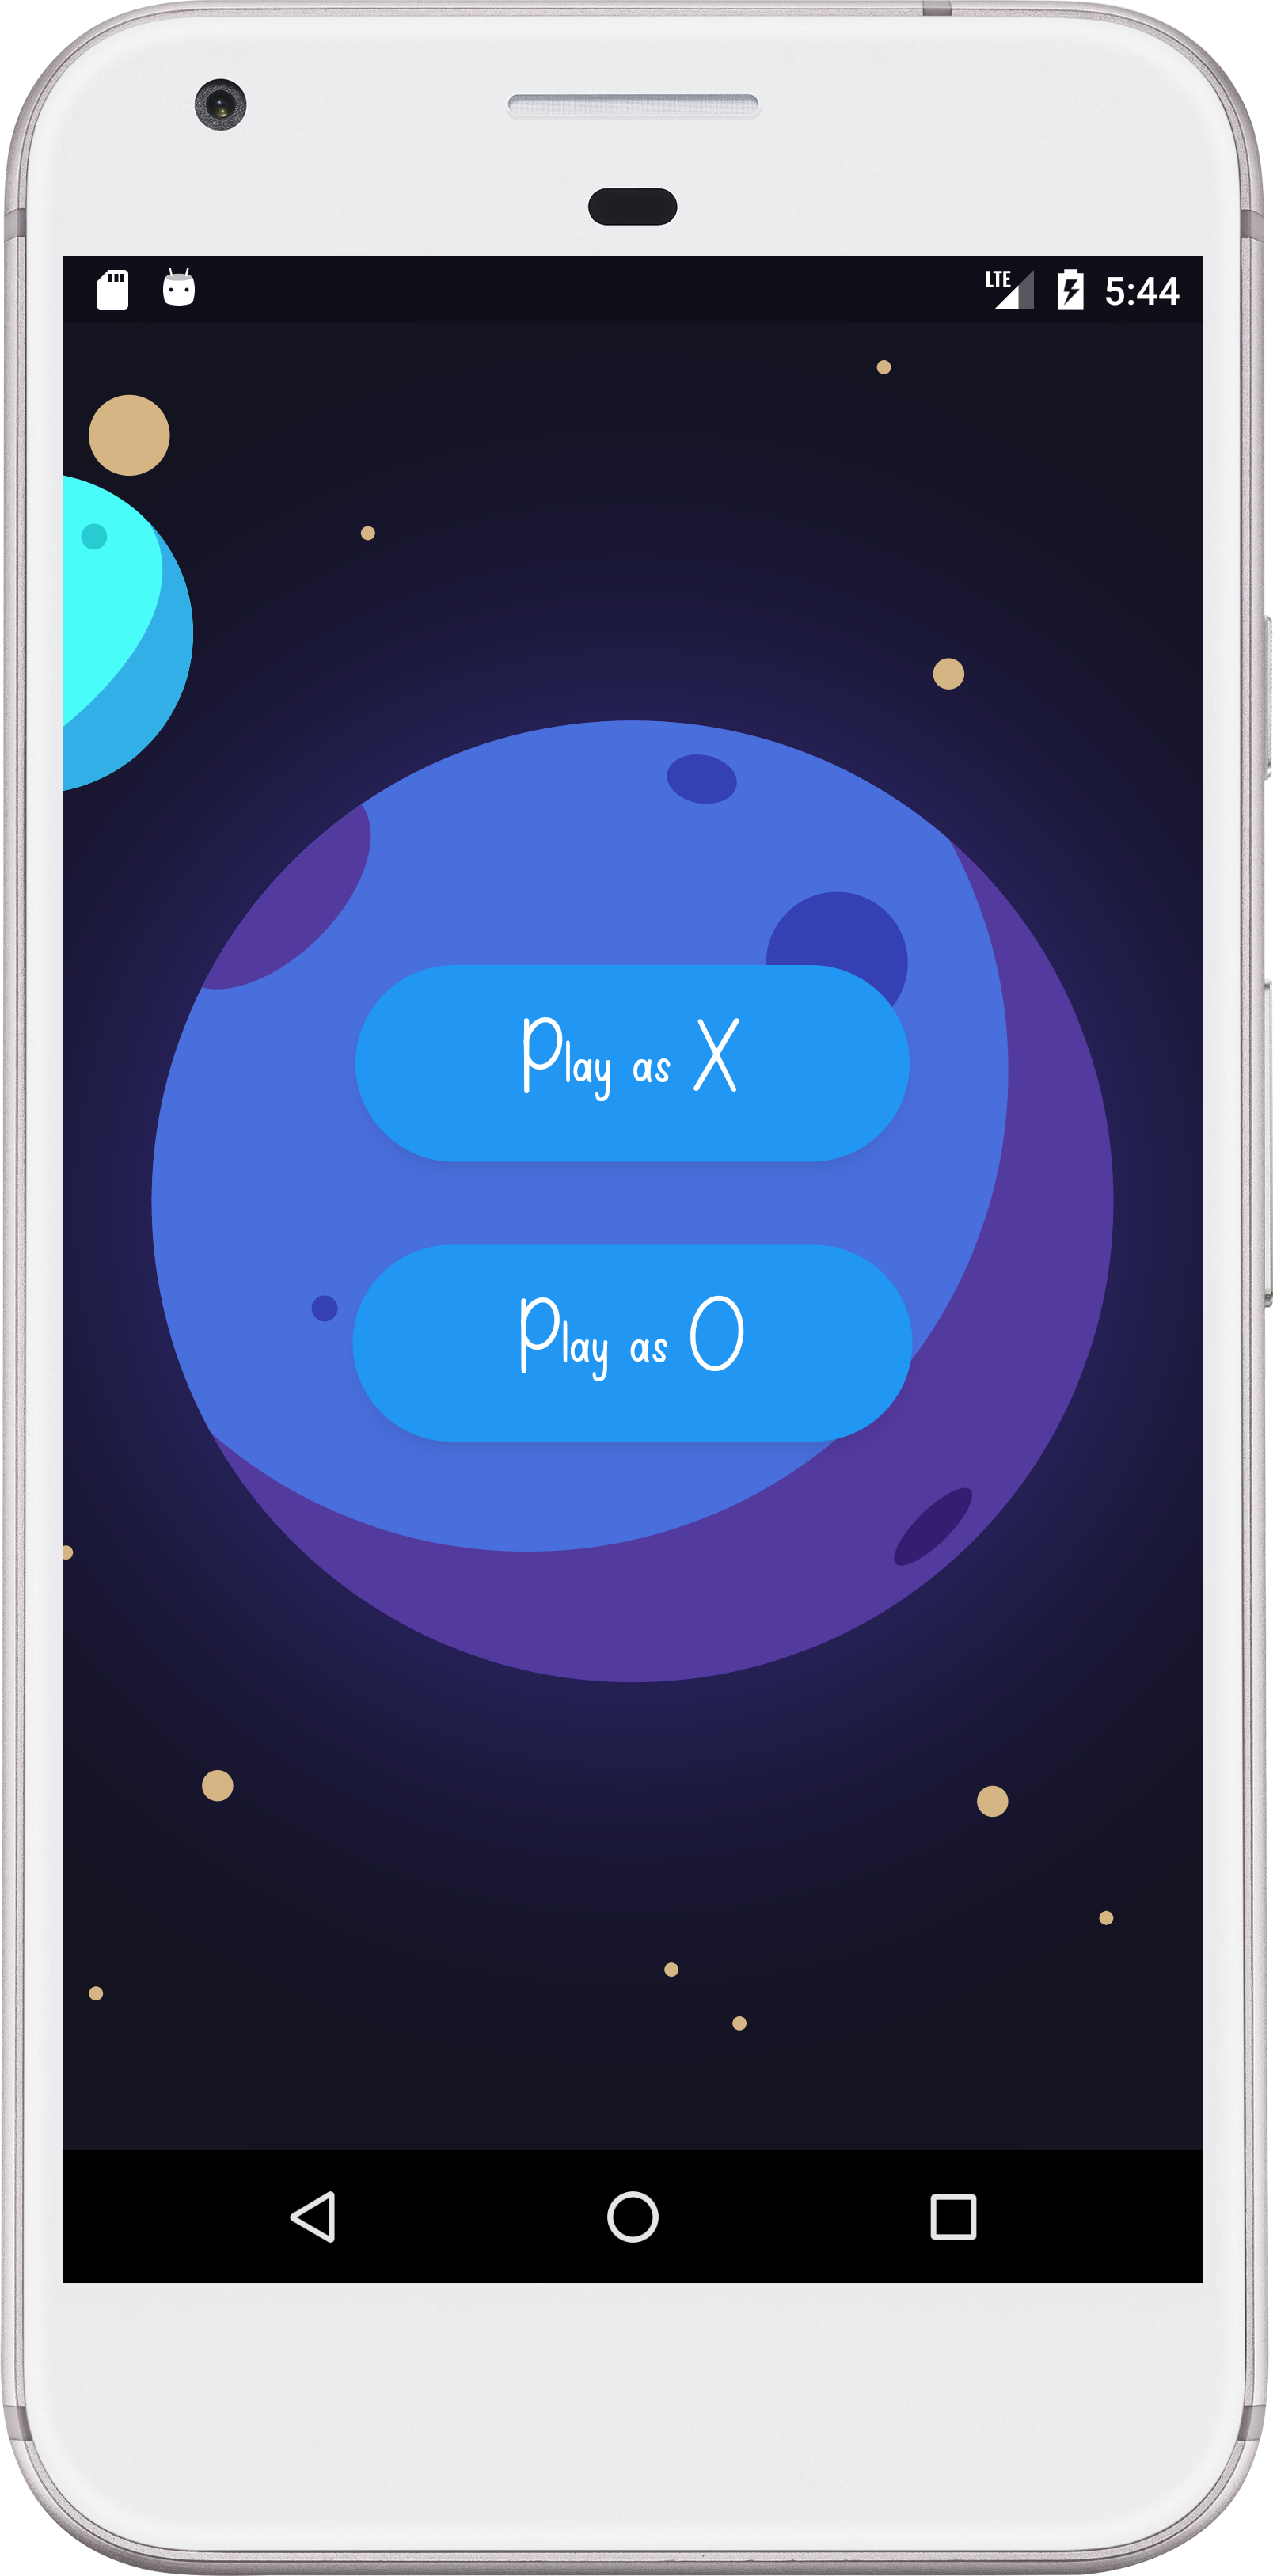 A simple Tic Tac Toe game with an unbeatable AI opponent, Built using Flutter